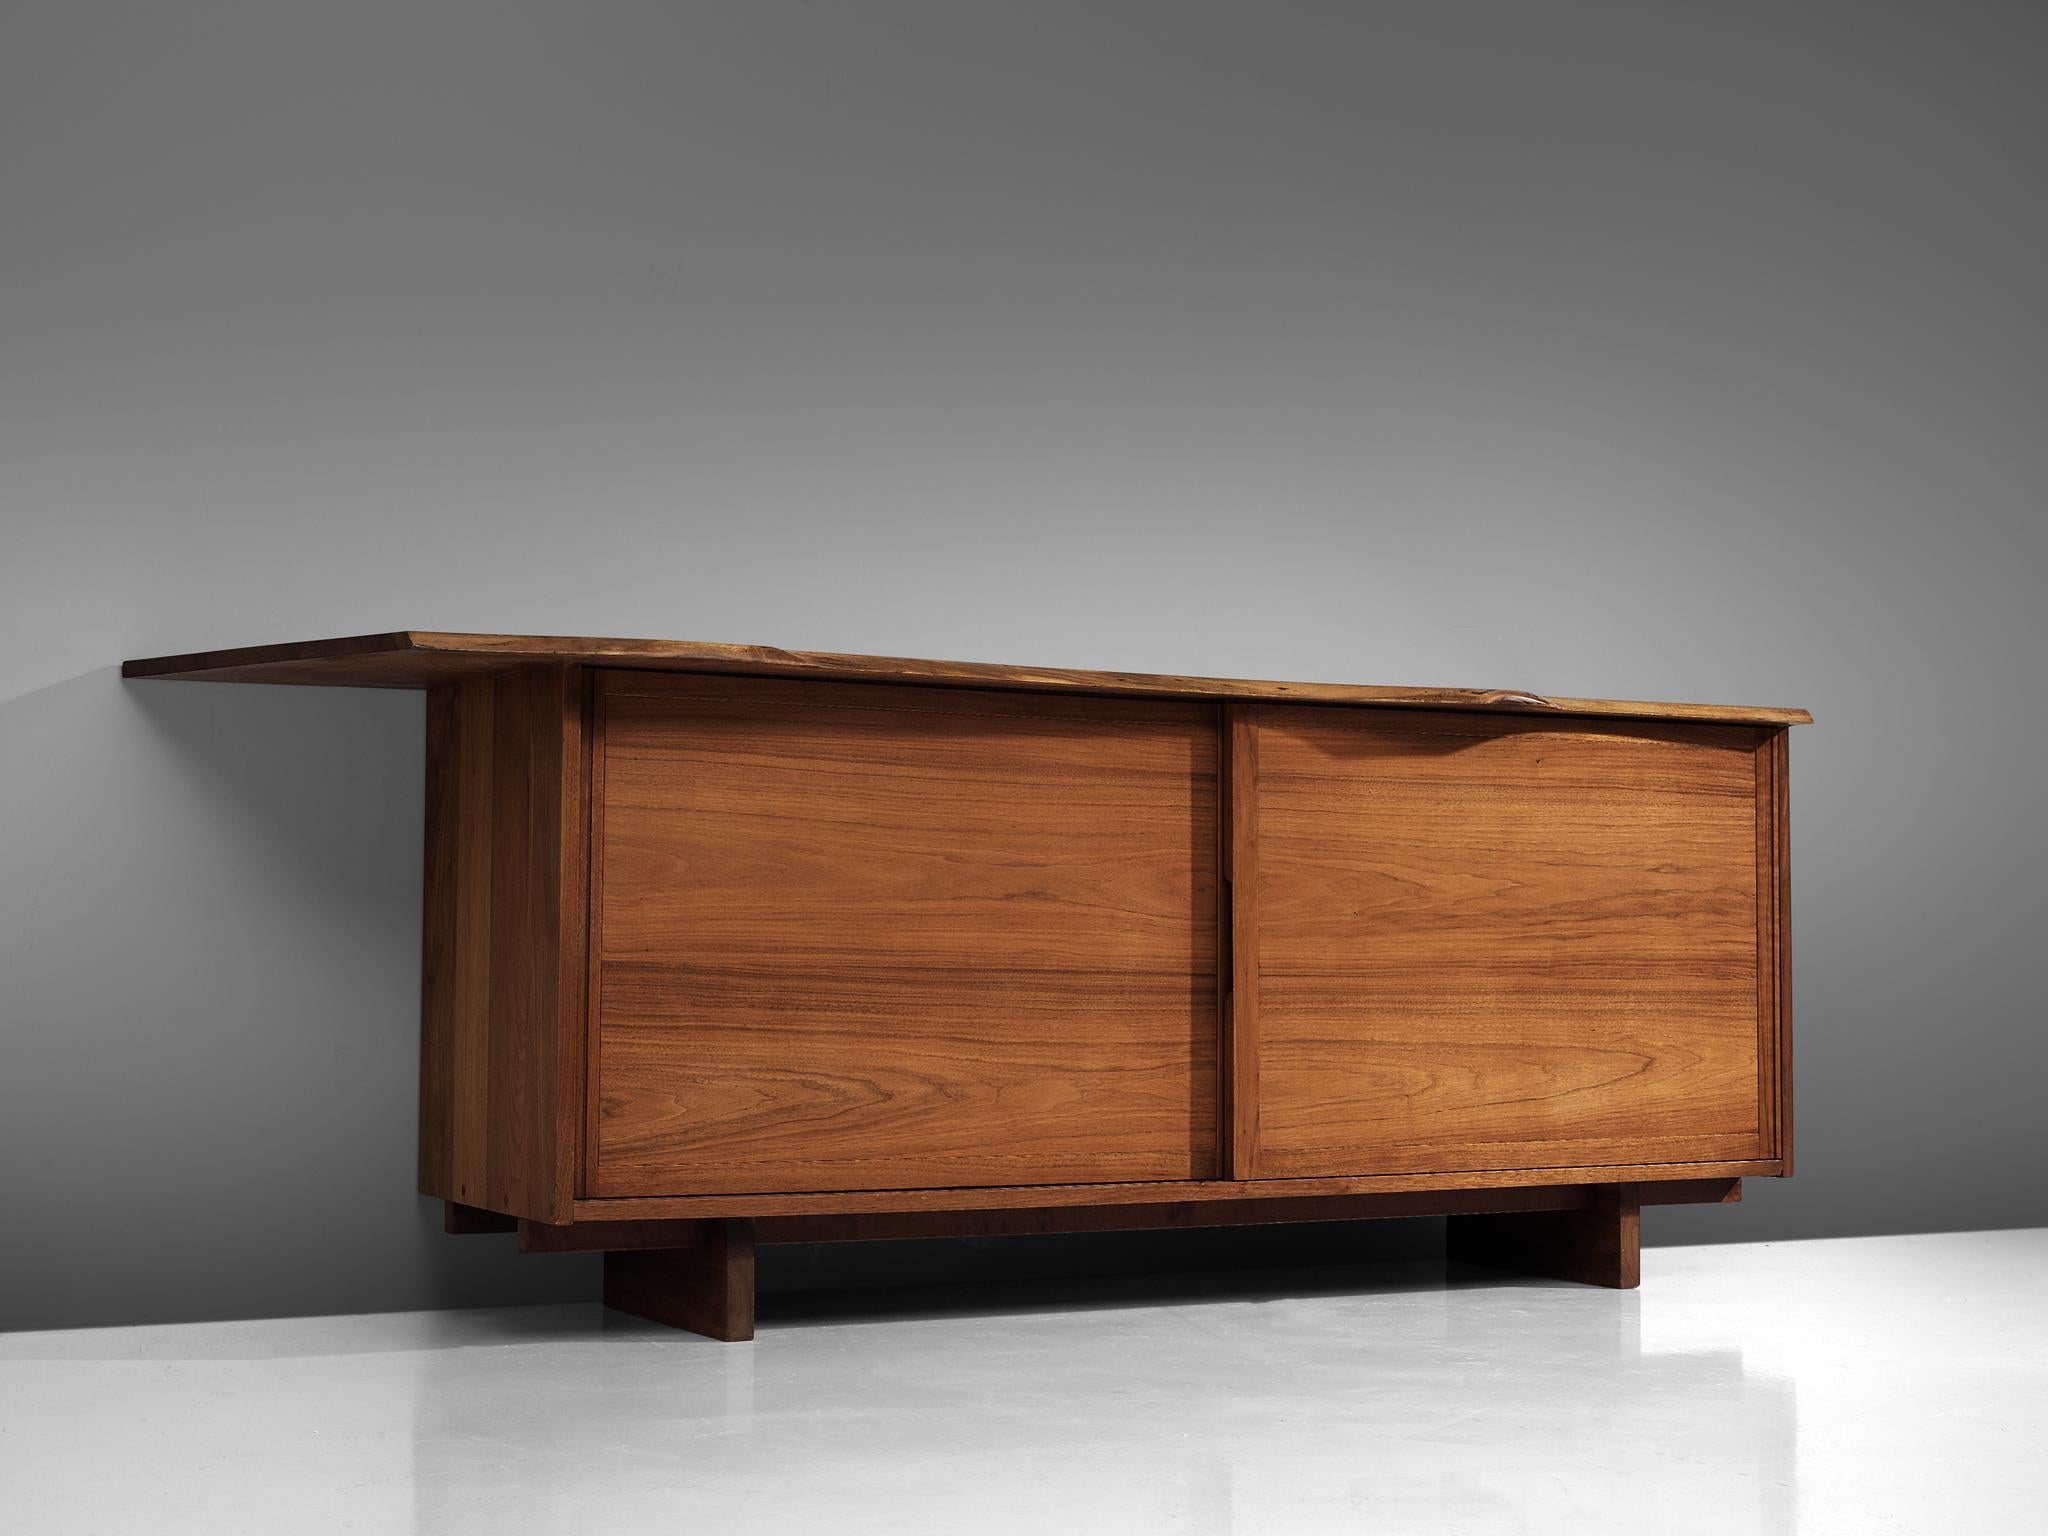 George Nakashima, sideboard, American walnut, United States, 1958

This cabinet by George Nakashima features two sliding doors and a large slab spanning past the edges of the cabinet. Nakashima designed the piece to express the character of this